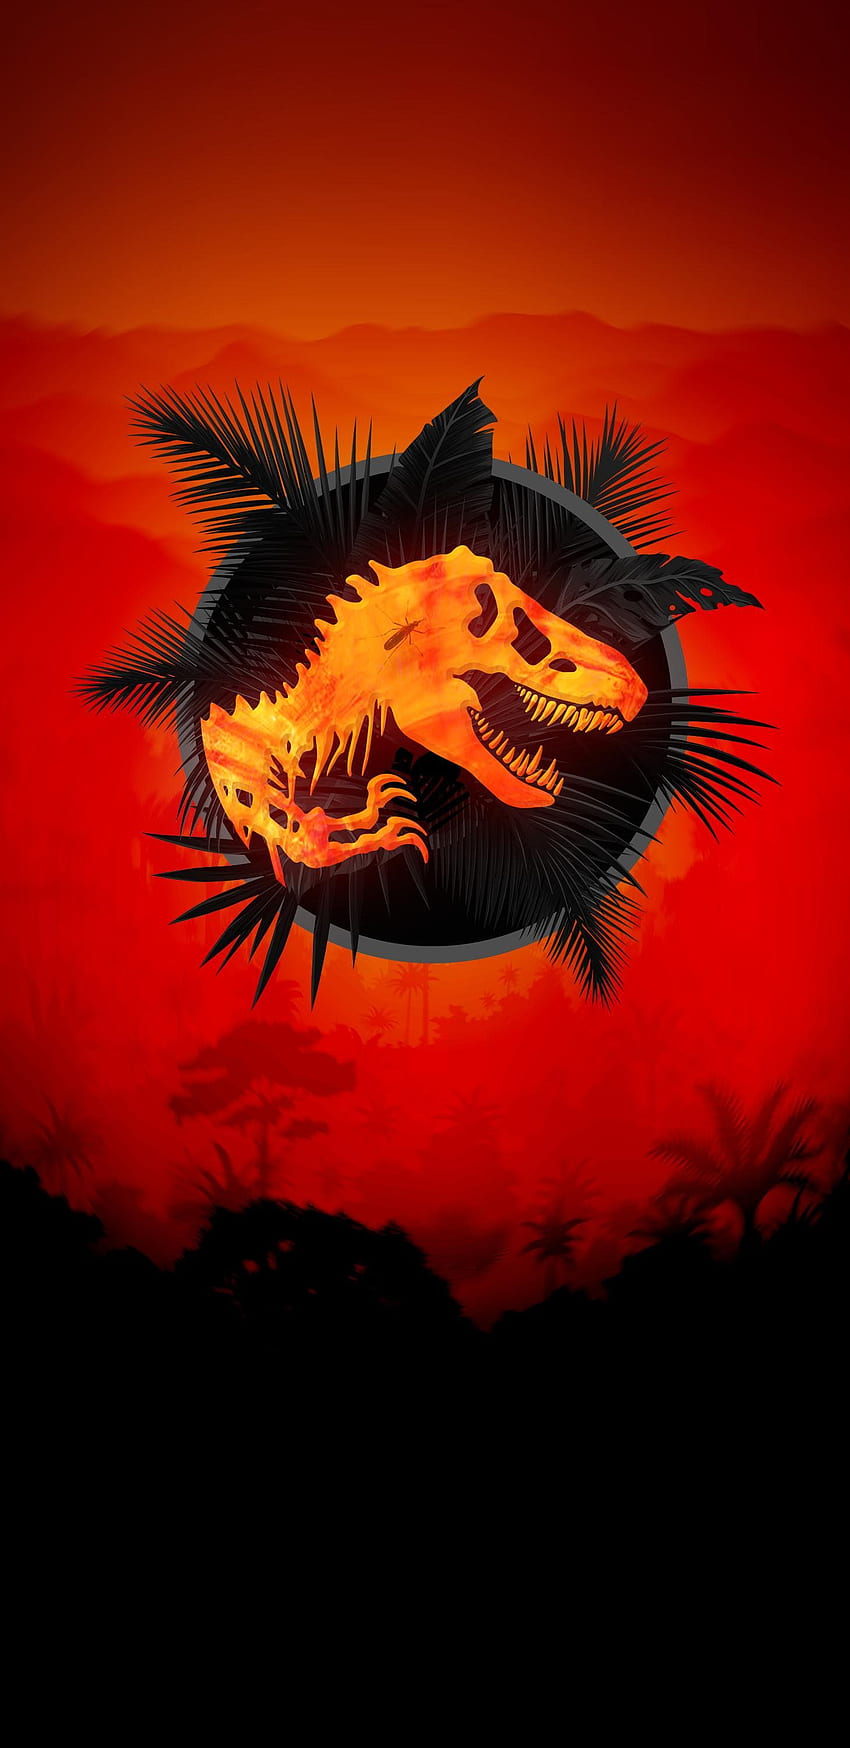 Jurassic Park - 4 Walls, Link in comments : Mobile HD phone wallpaper